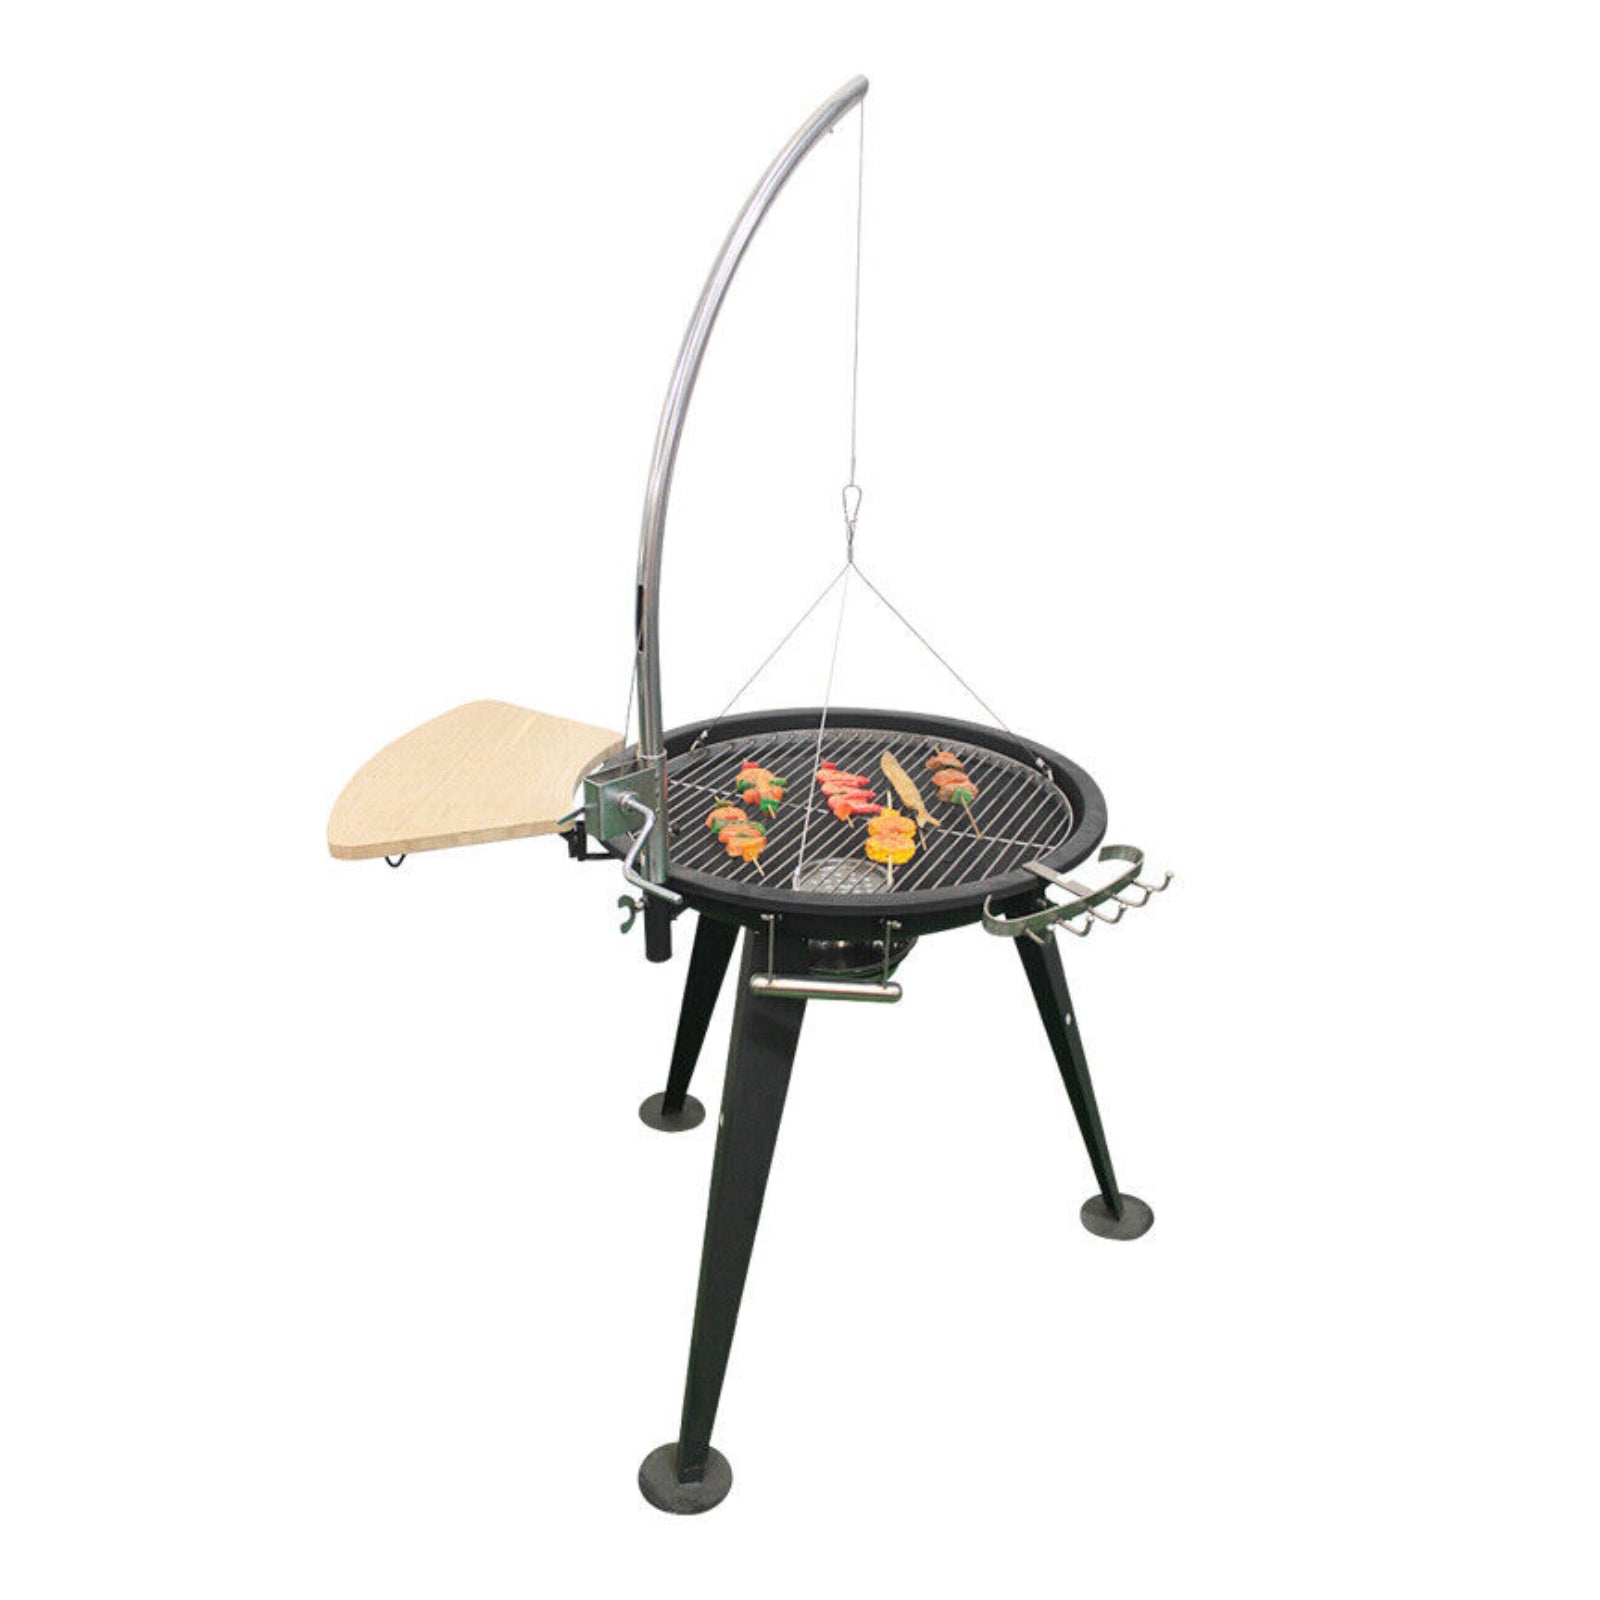 Willkon Iron & Stainless Steel Charcoal Grill BBQ Fire Pit - 60cm - Homeware Discounts